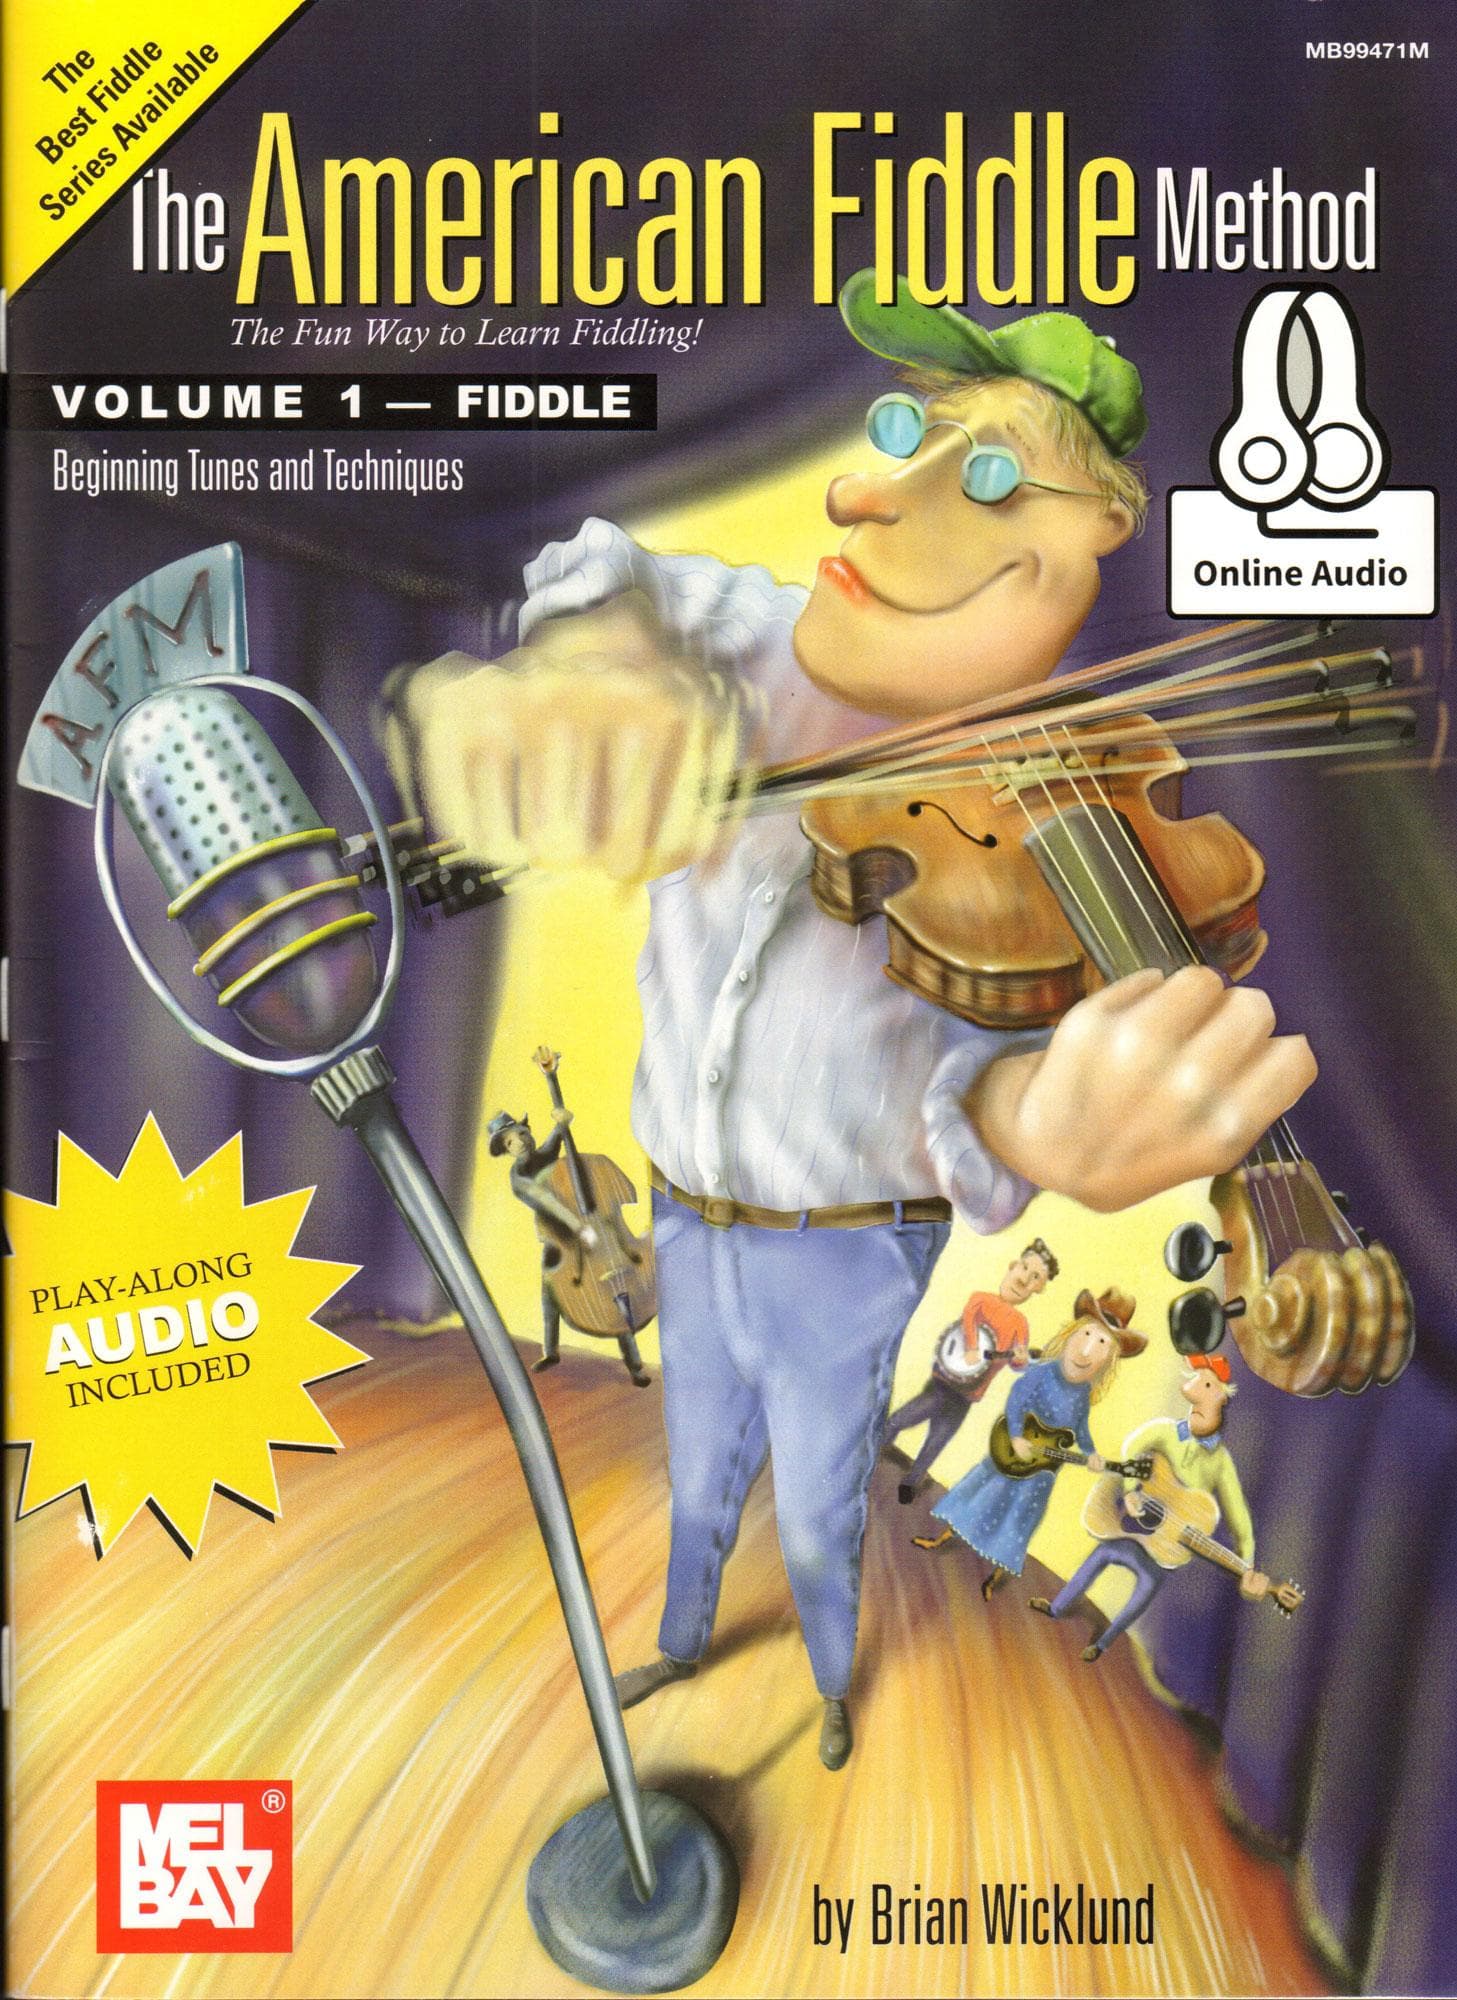 Wicklund, Brian - The American Fiddle Method, Volume 1 - Violin - Book with Online Audio - Mel Bay Publications